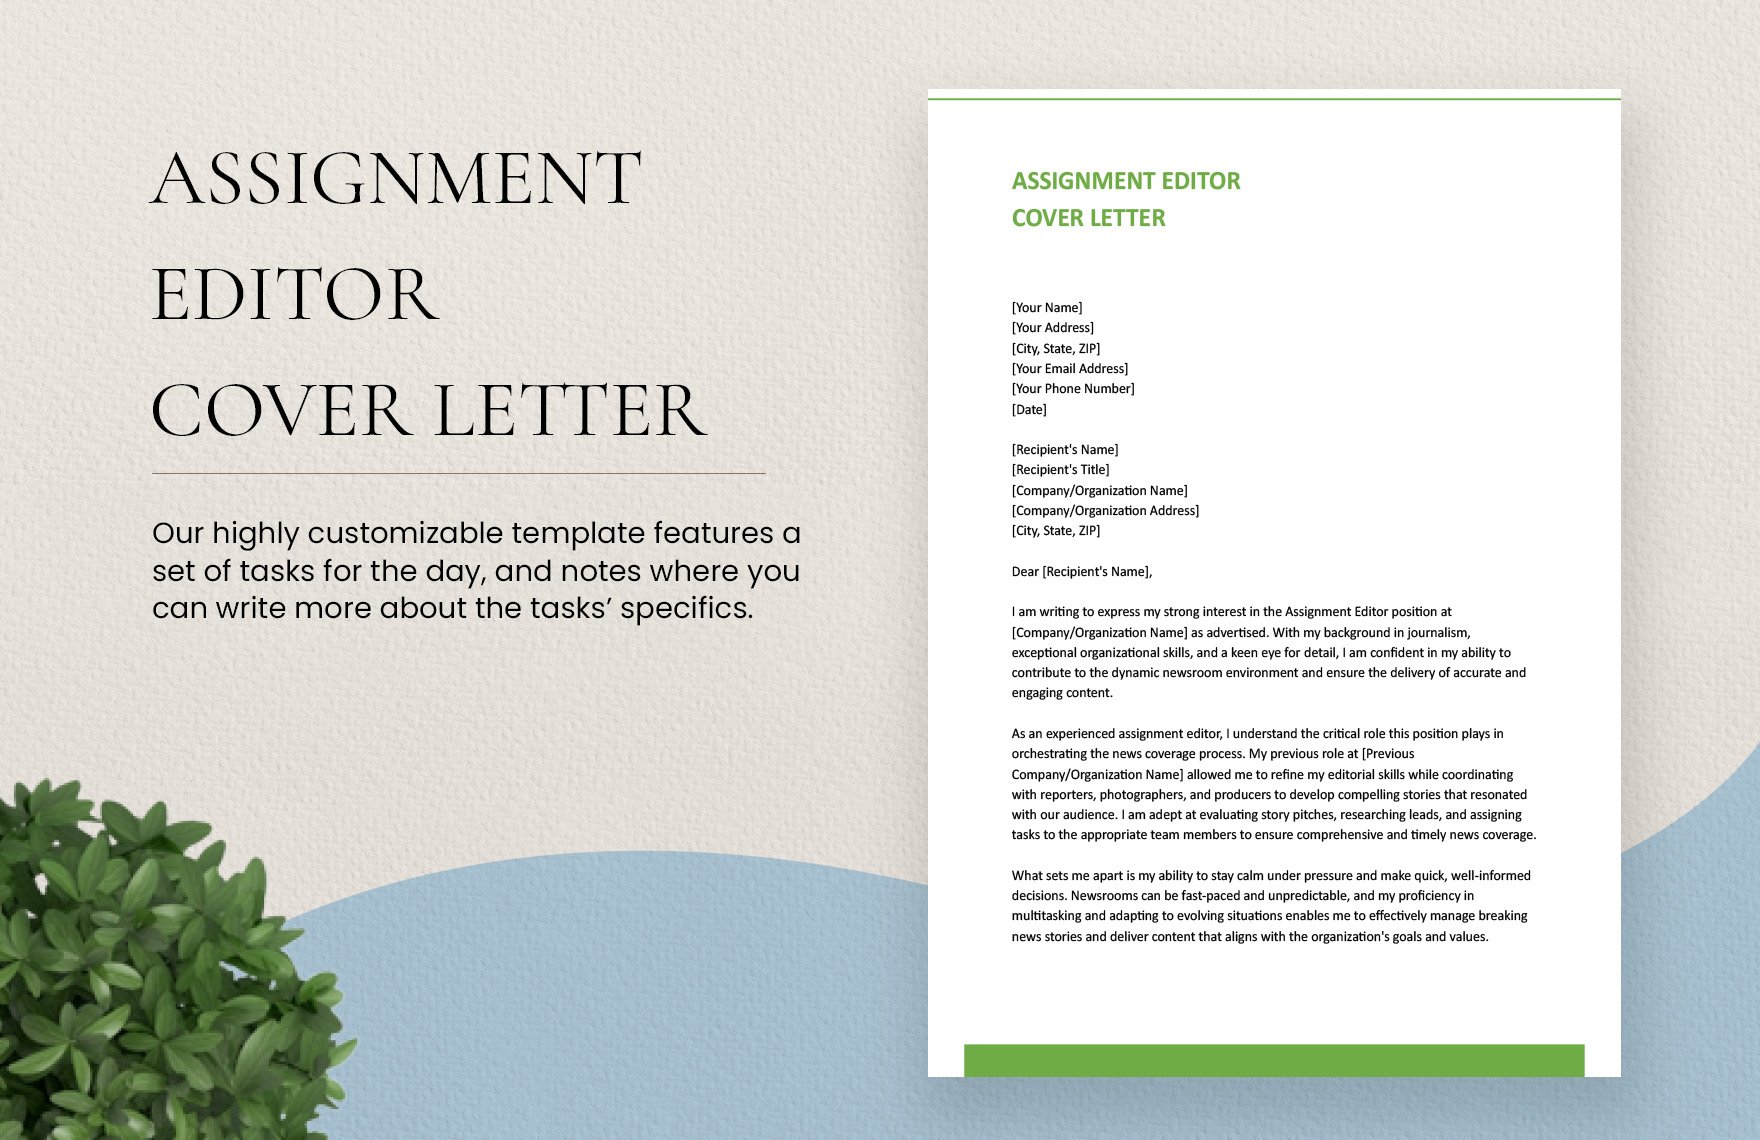 Assignment Editor Cover Letter